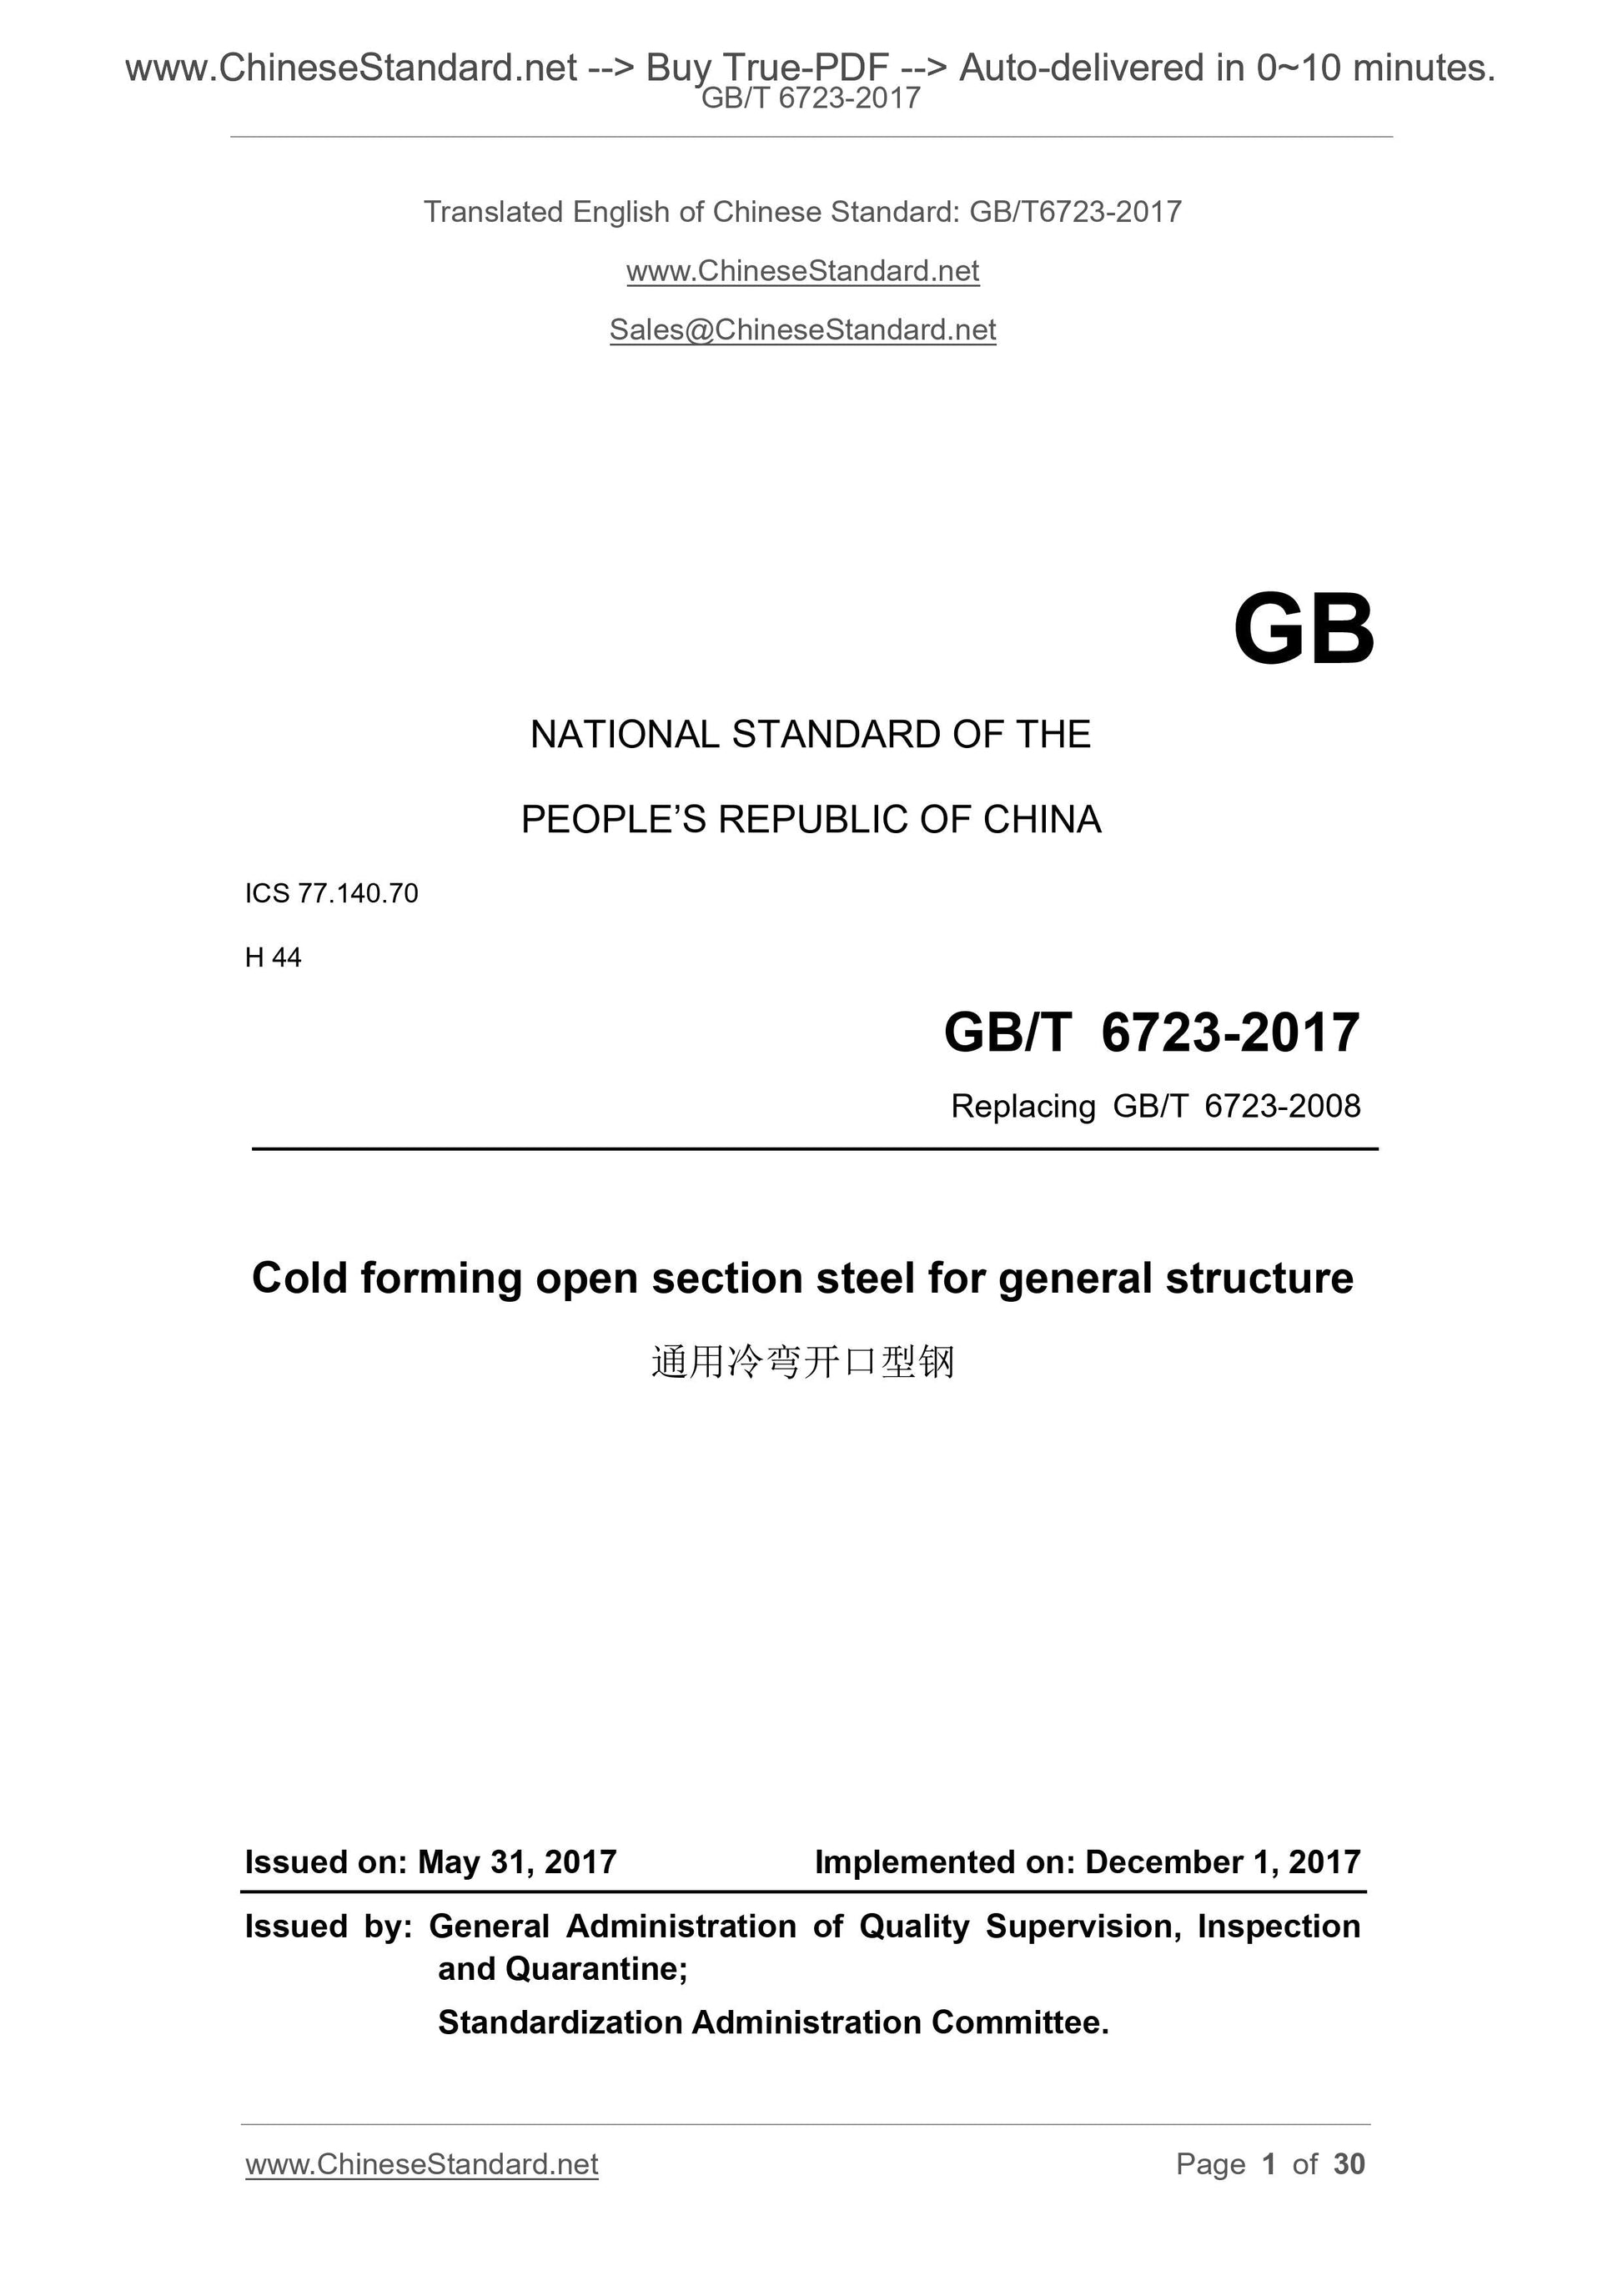 GB/T 6723-2017 Page 1